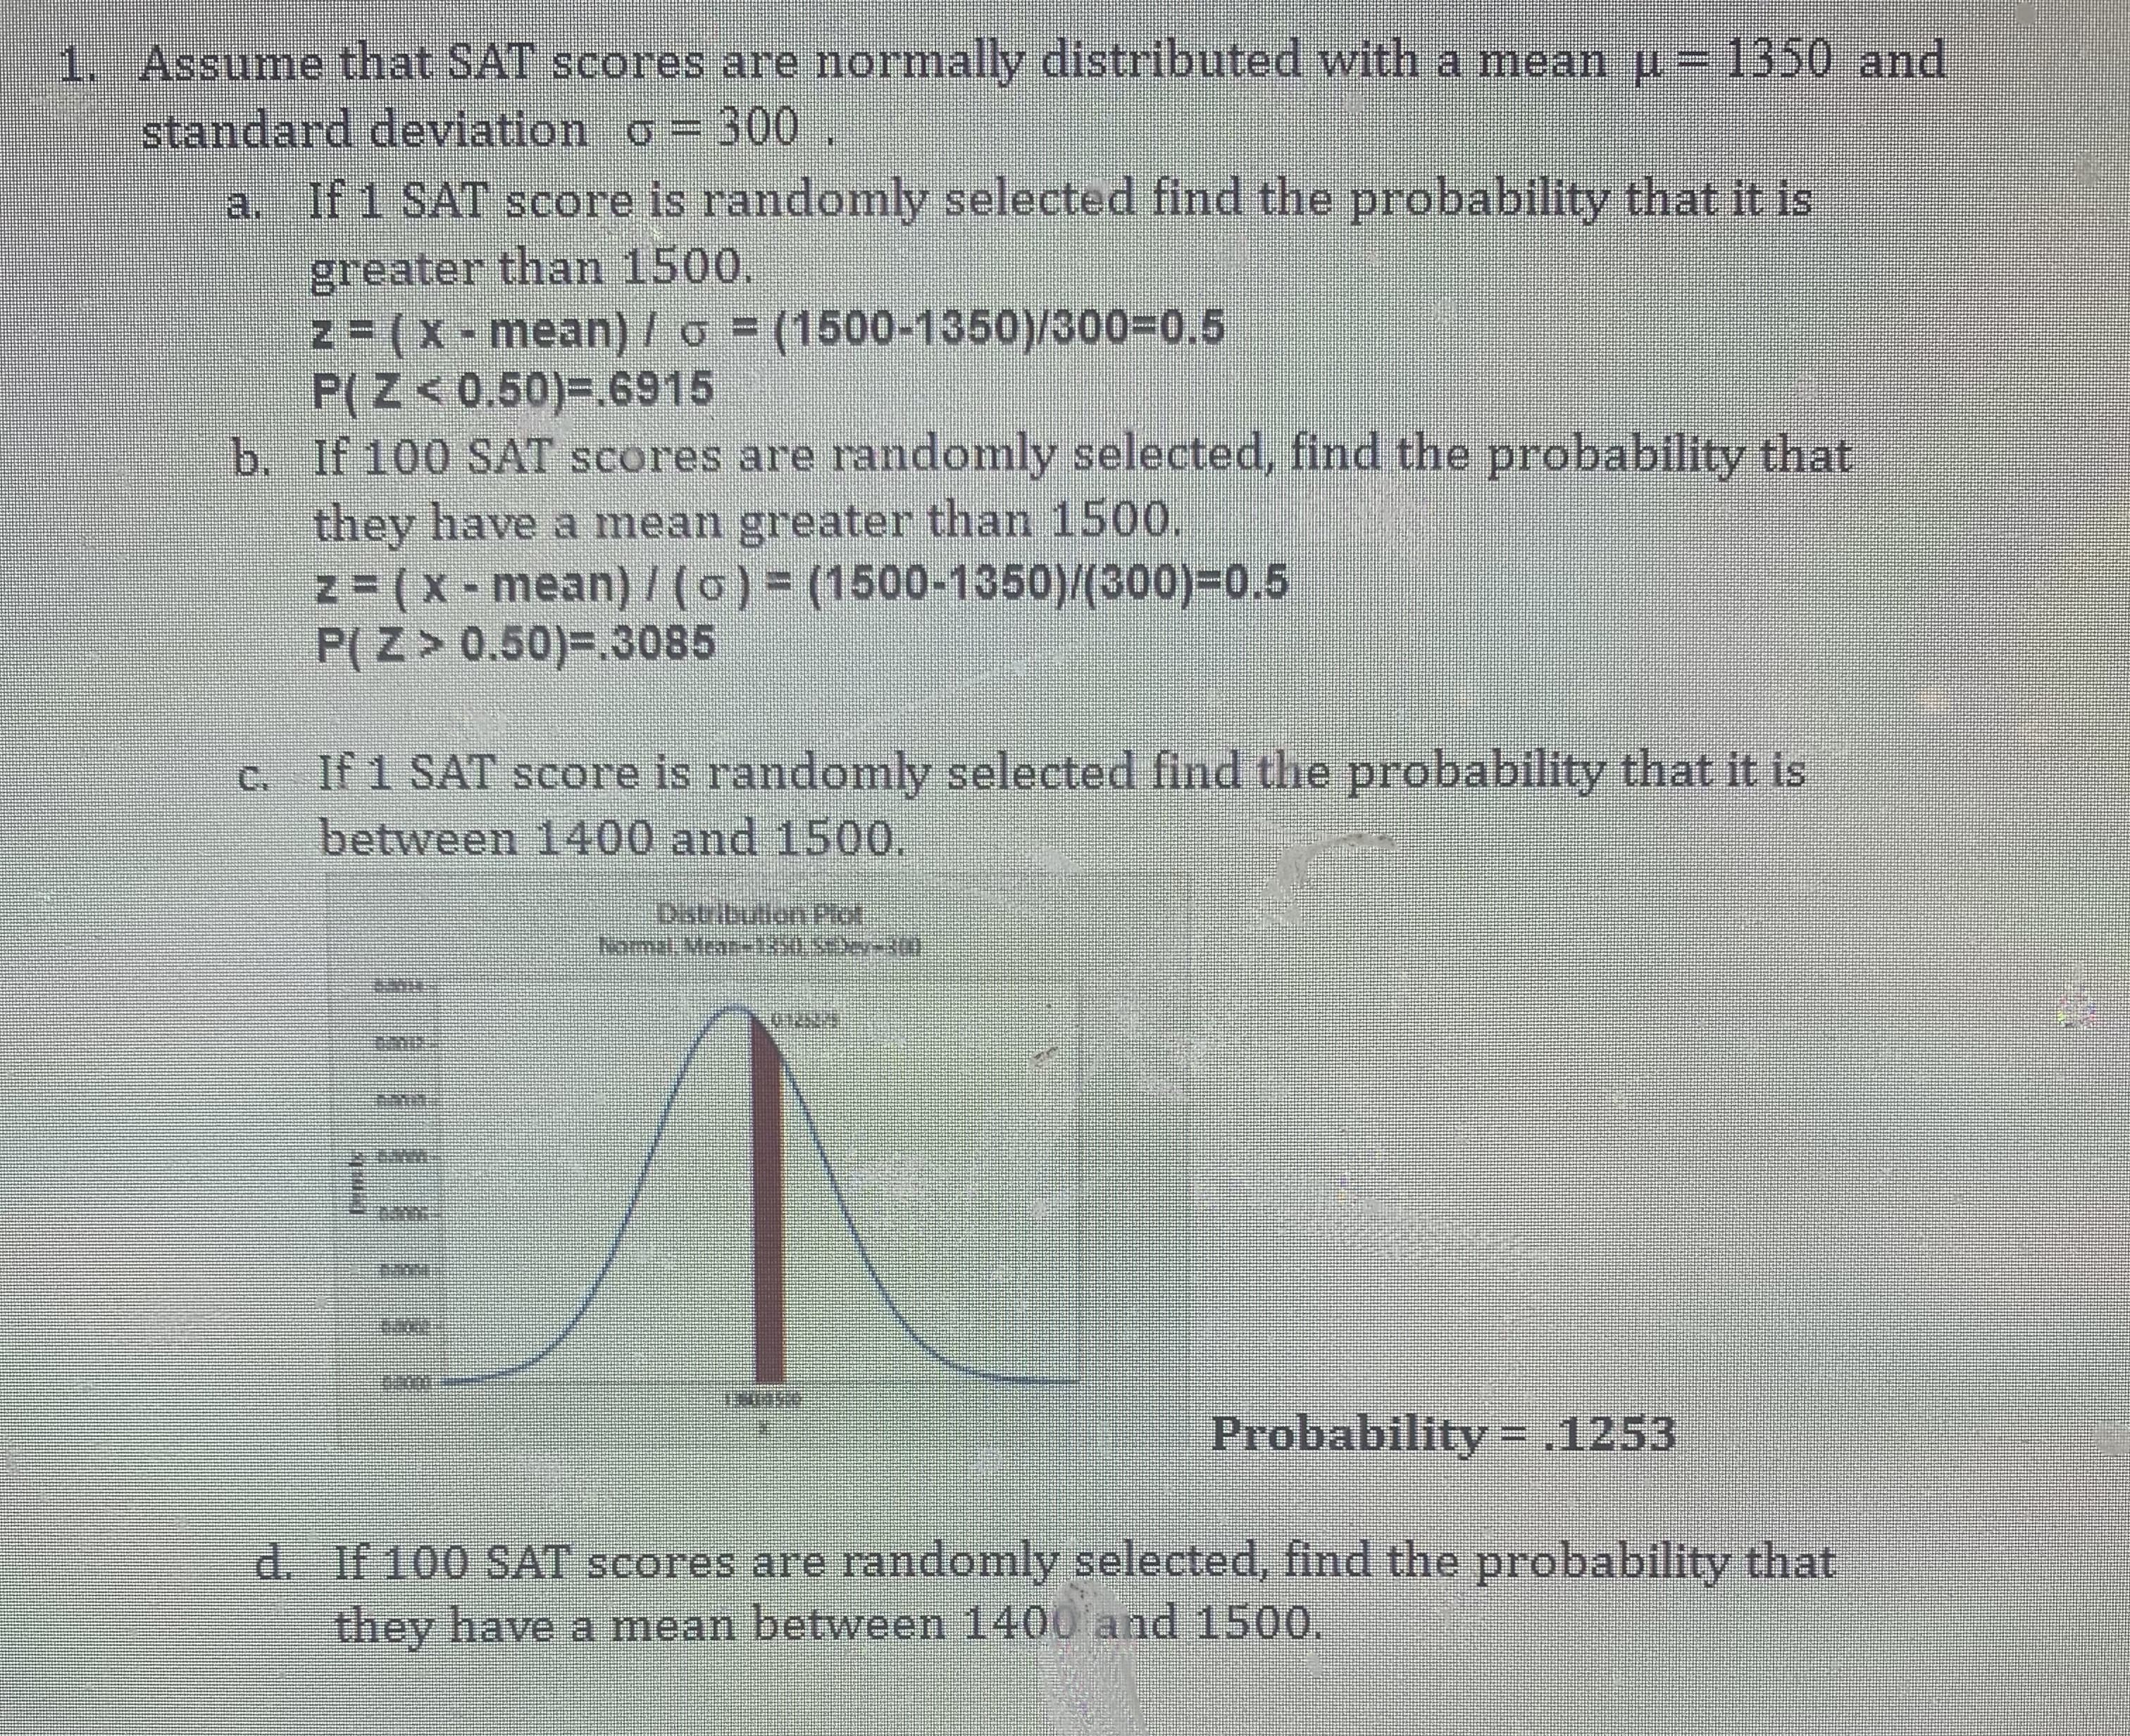 d. If 100 SAT scores are randomly selected, find the probability that
they have a mean between 1400 and 1500.
